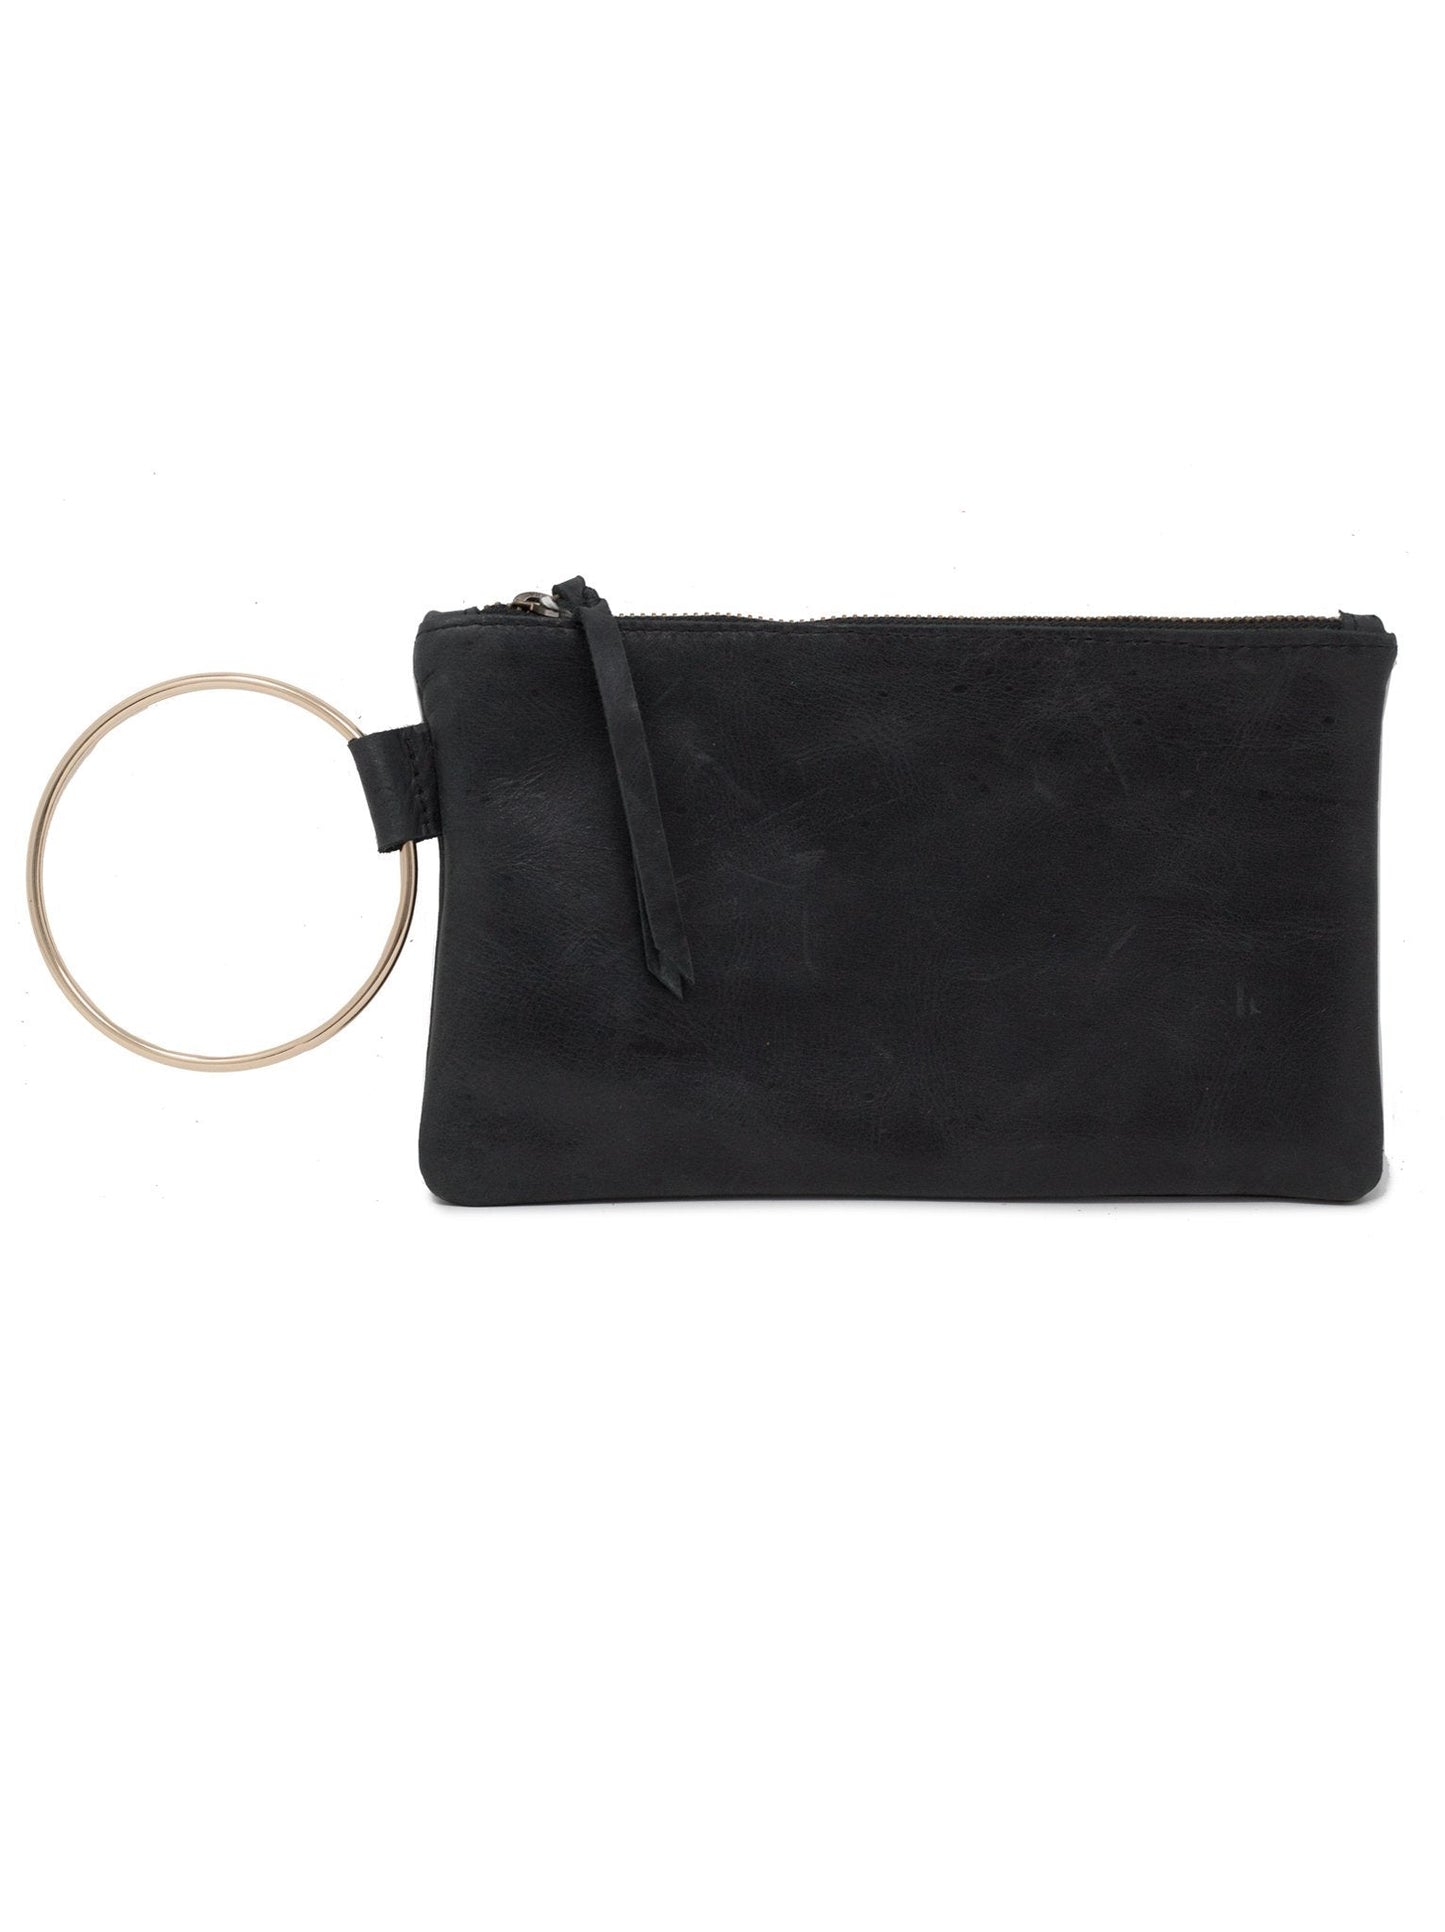 Fozi Wristlet in Black by Able